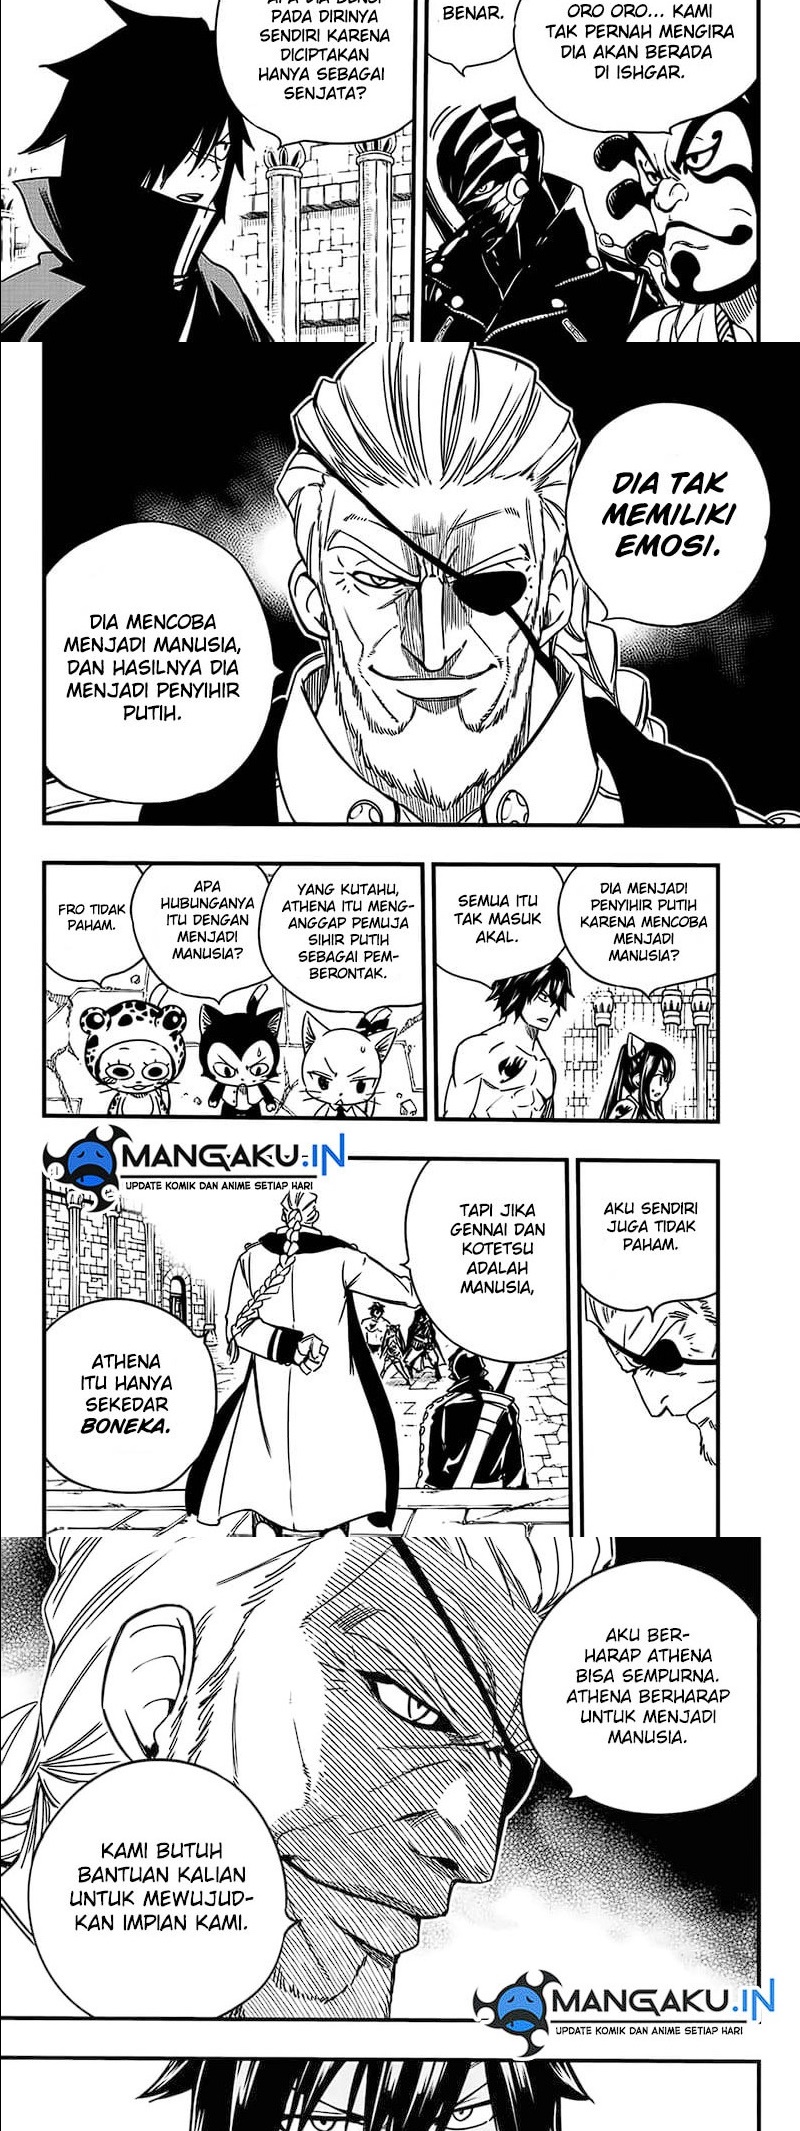 Fairy Tail 100 Years Quest Chapter 131